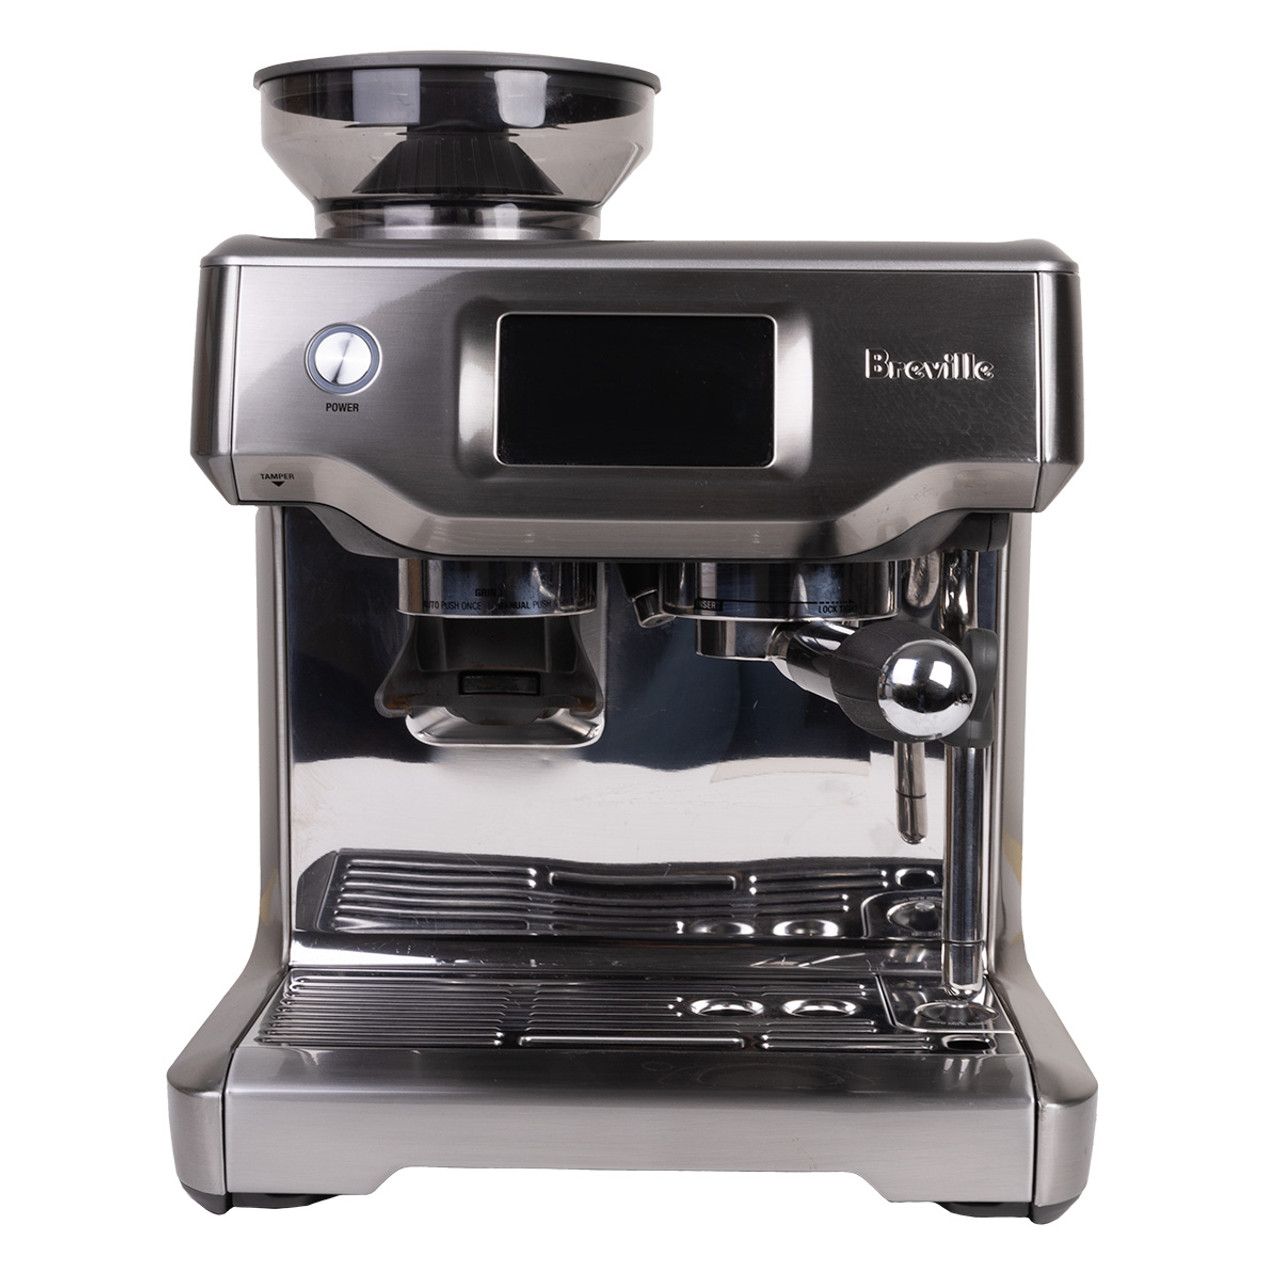 https://cdn11.bigcommerce.com/s-6h7ychjk4/images/stencil/1280x1280/products/11313/95541/Breville-Barista-Touch-WBG-3__77331.1697724108.jpg?c=1&imbypass=on